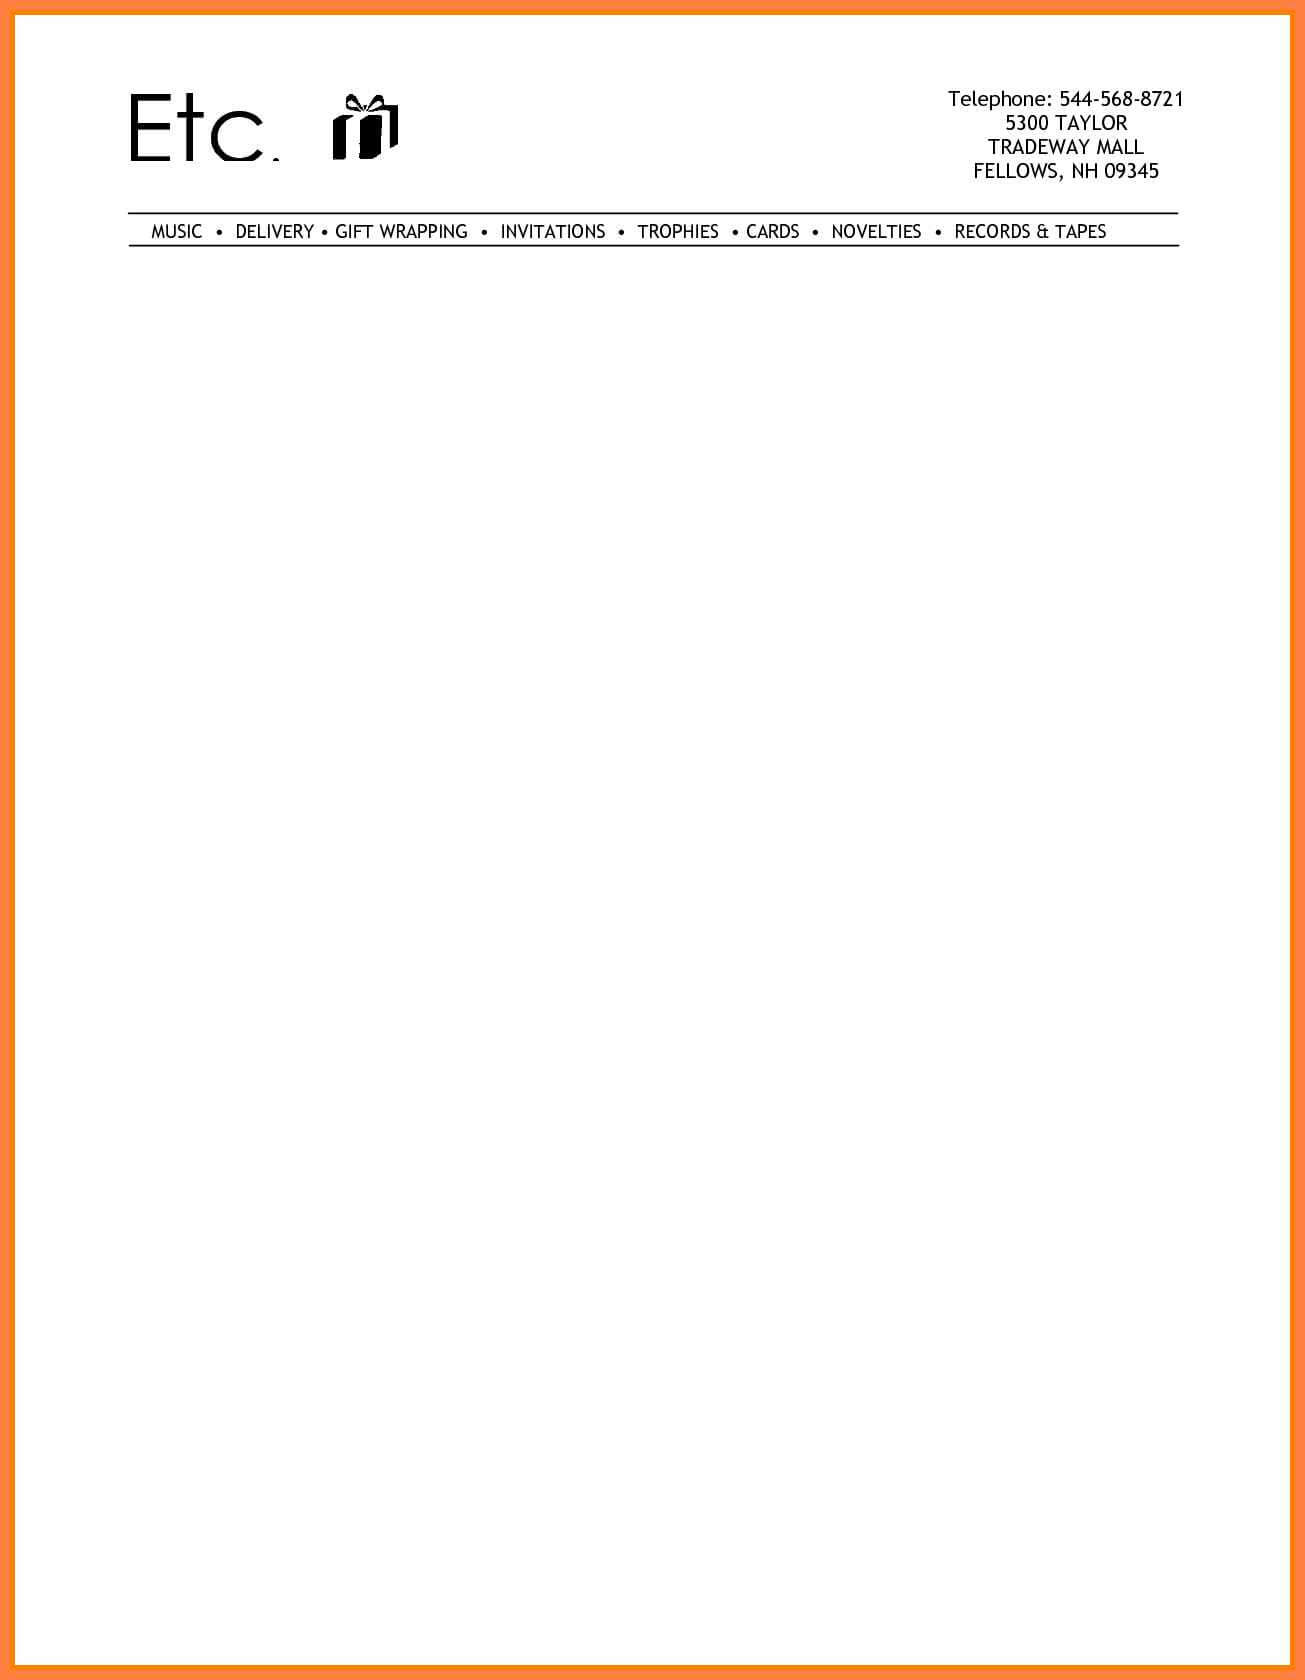 8+ Free Letterhead Templates For Word 2007 | Andrew Gunsberg Throughout Free Certificate Templates For Word 2007